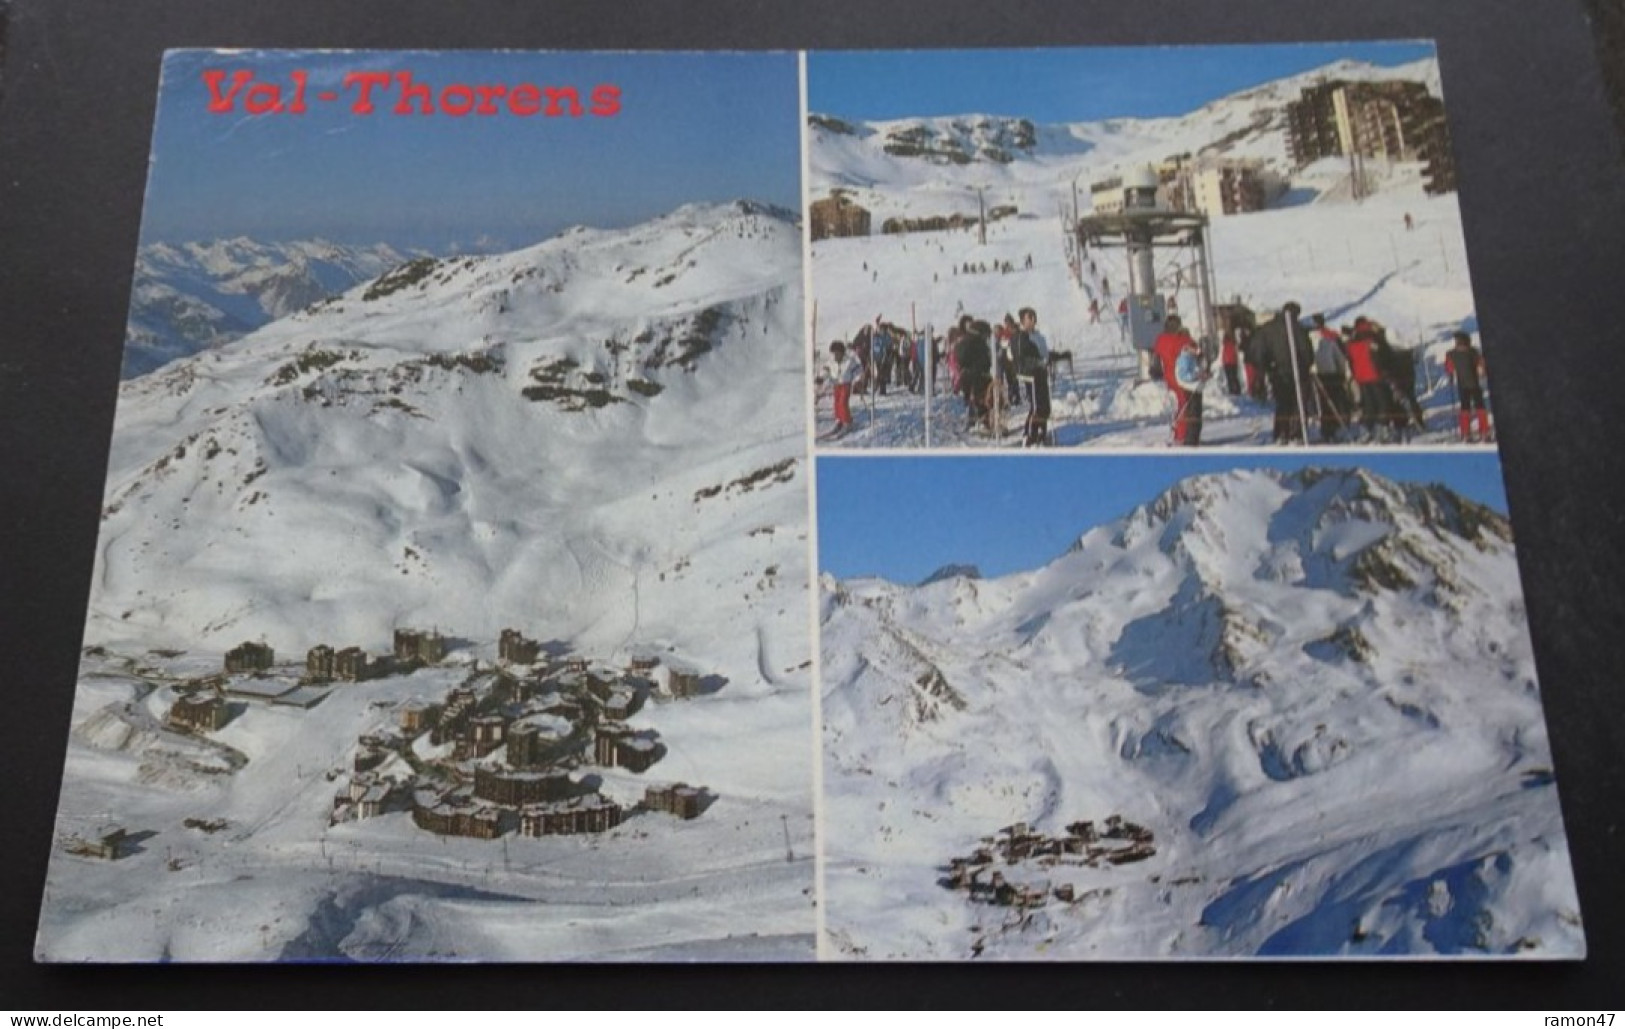 Val-Thorens - Photographe J.-P. Francez, Annecy - "France Images" Editions - Wintersport